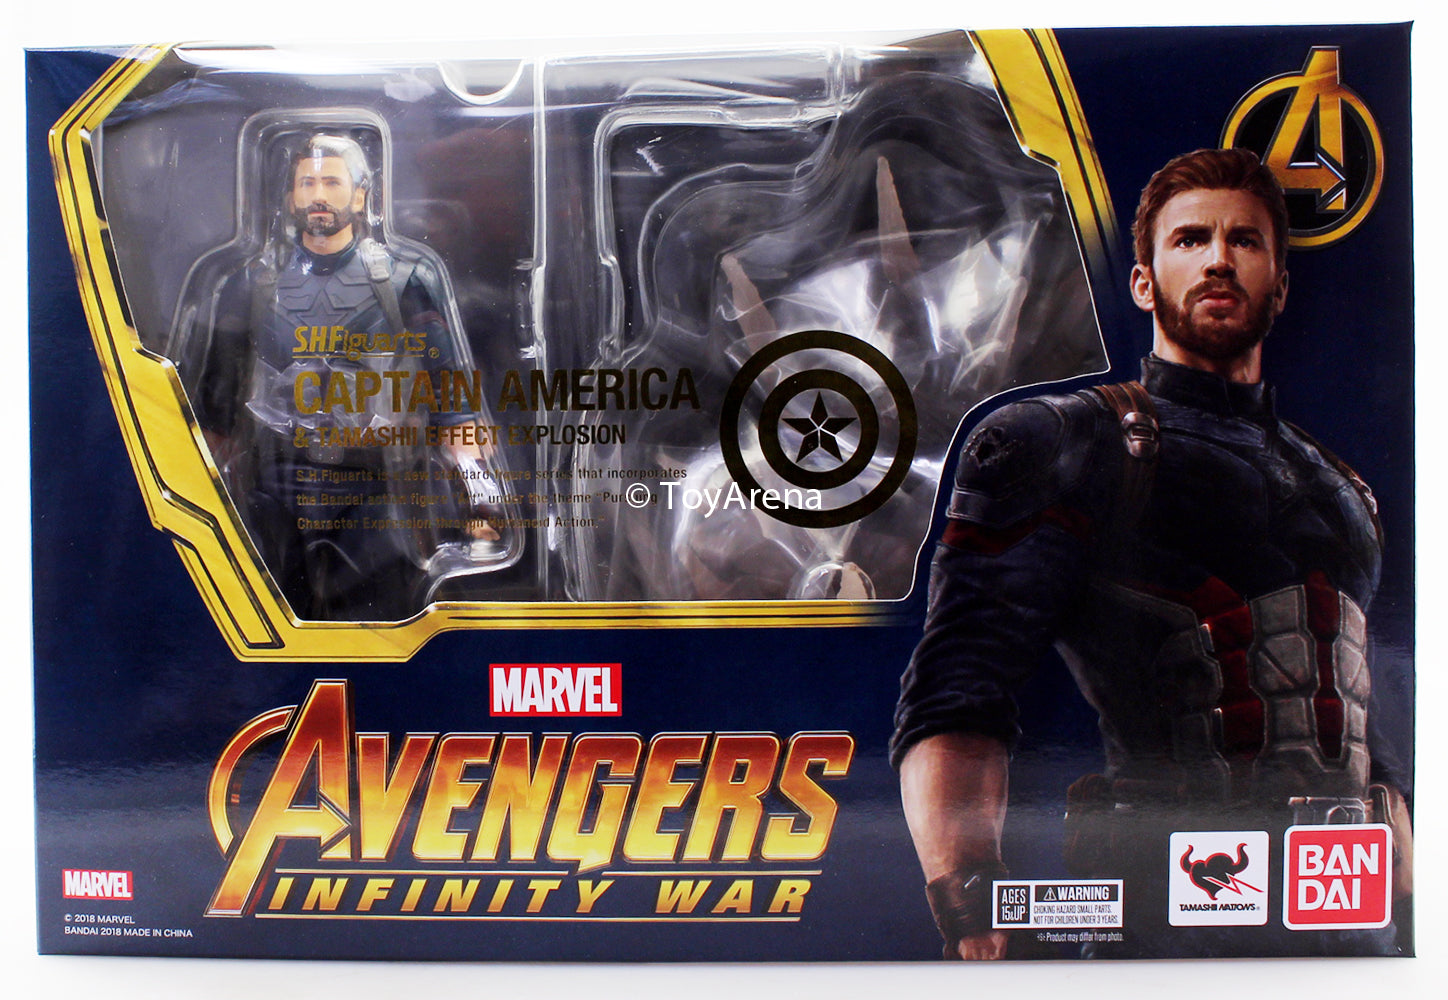 S.H. Figuarts Marvel Captain America Avengers Infinity Wars and Tamashii Explosion Effect